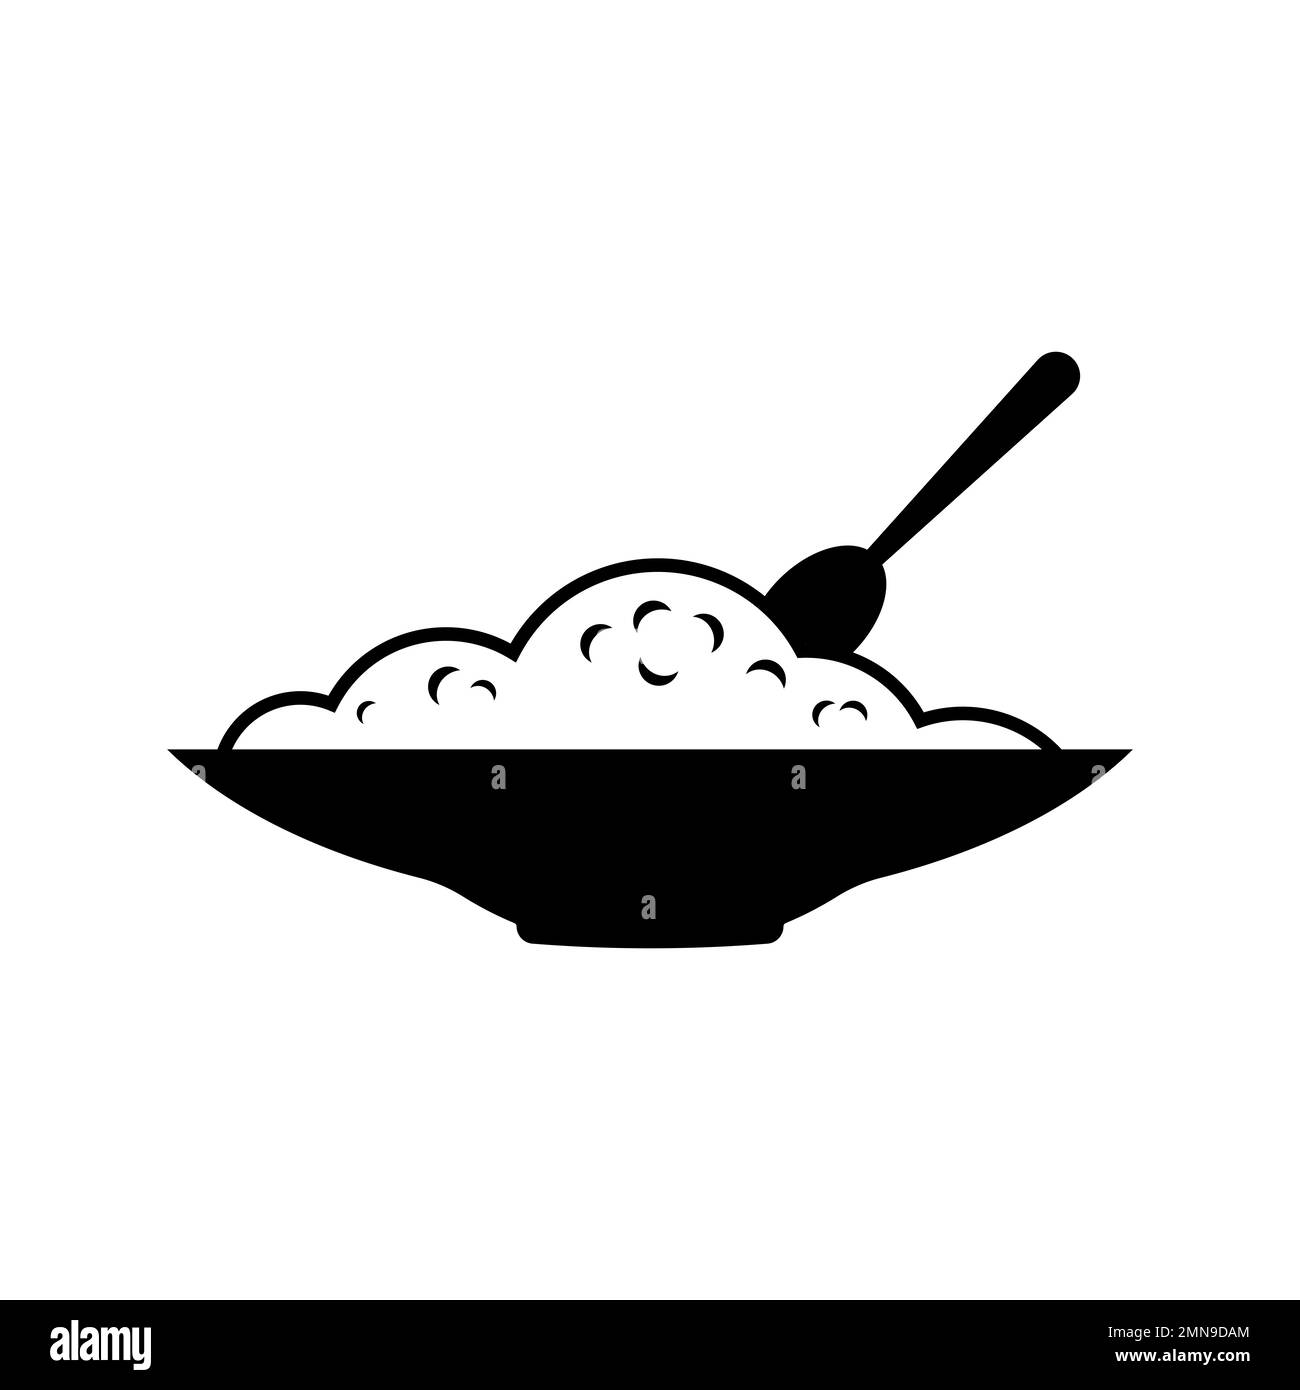 plate and food vector icon. illustration simple design. Stock Photo